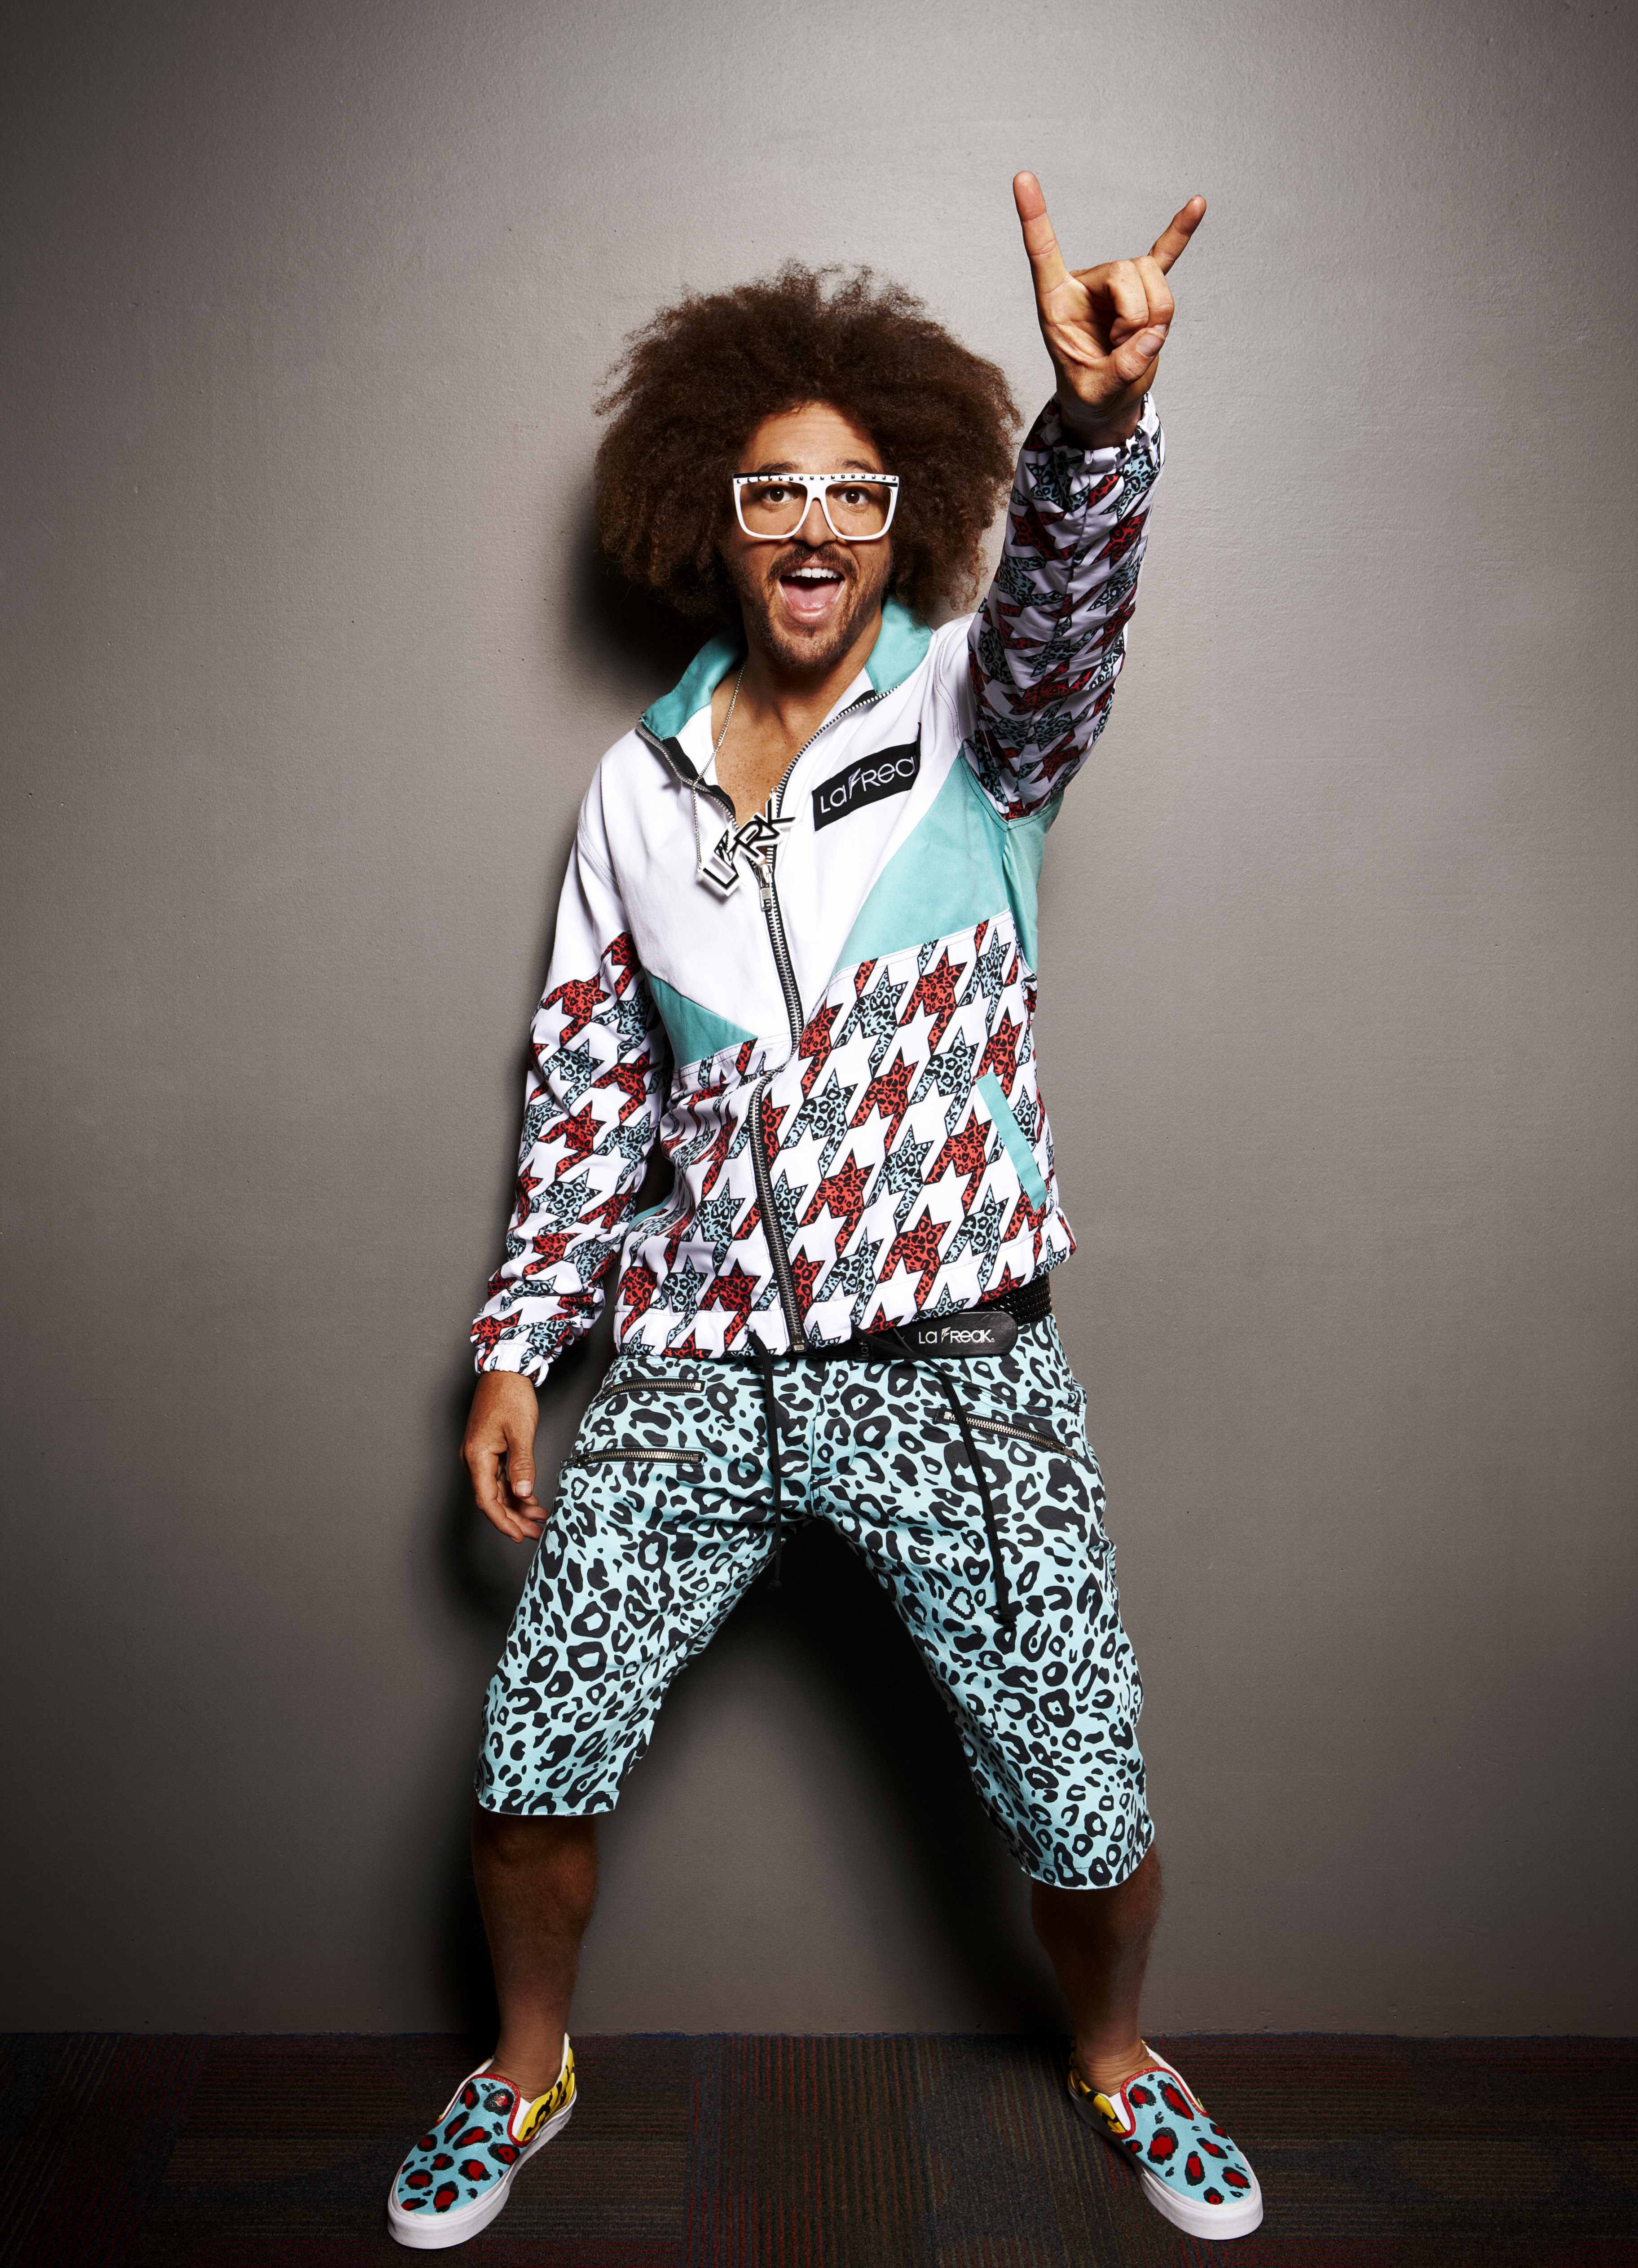 redfoo as a kid